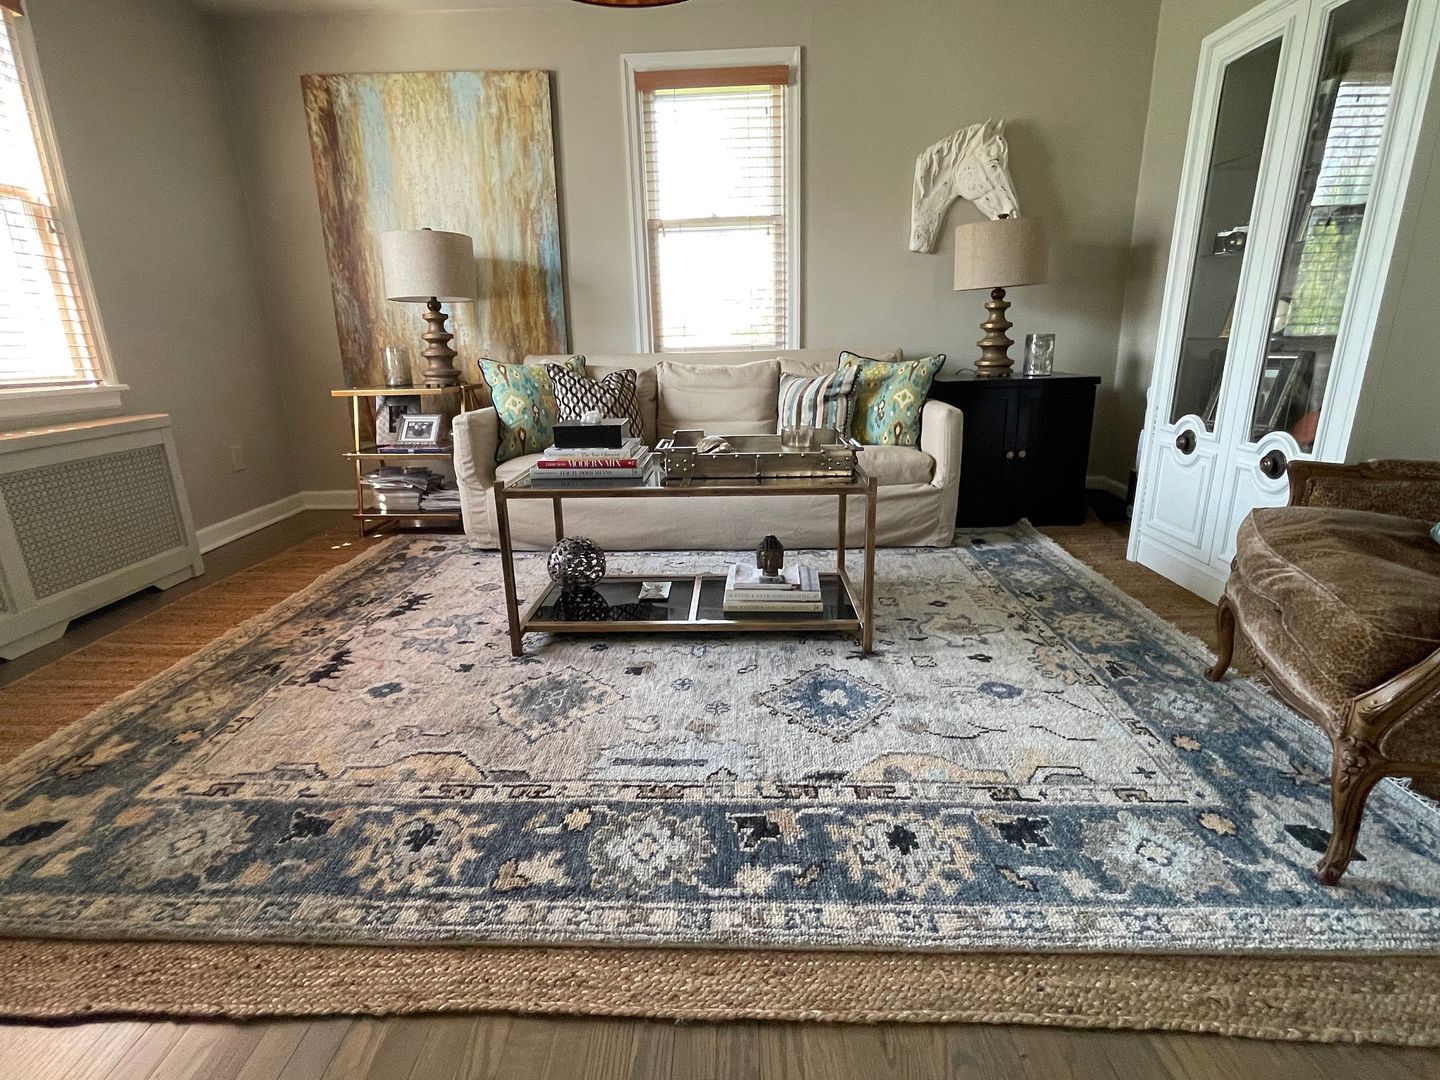 How To Mix And Match Rugs Like A Pro - StoneGable